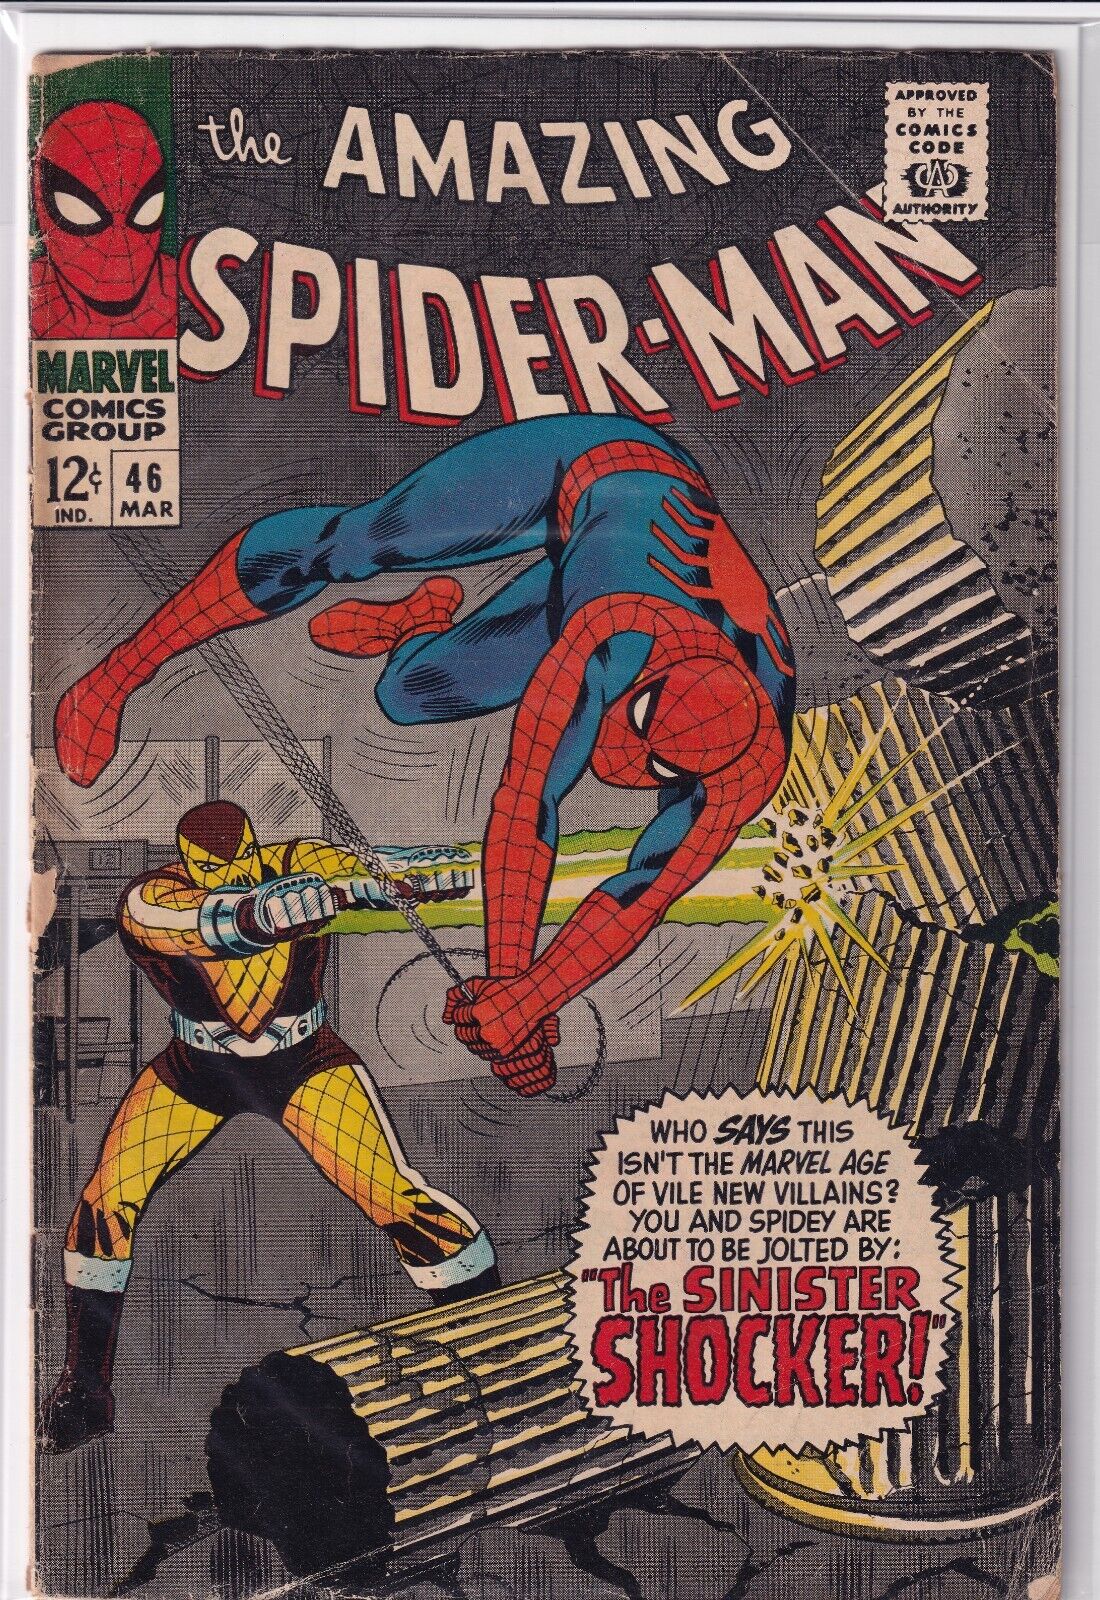 Amazing Spider-Man #46 (Marvel 1967) 1st Appearance of the Shocker